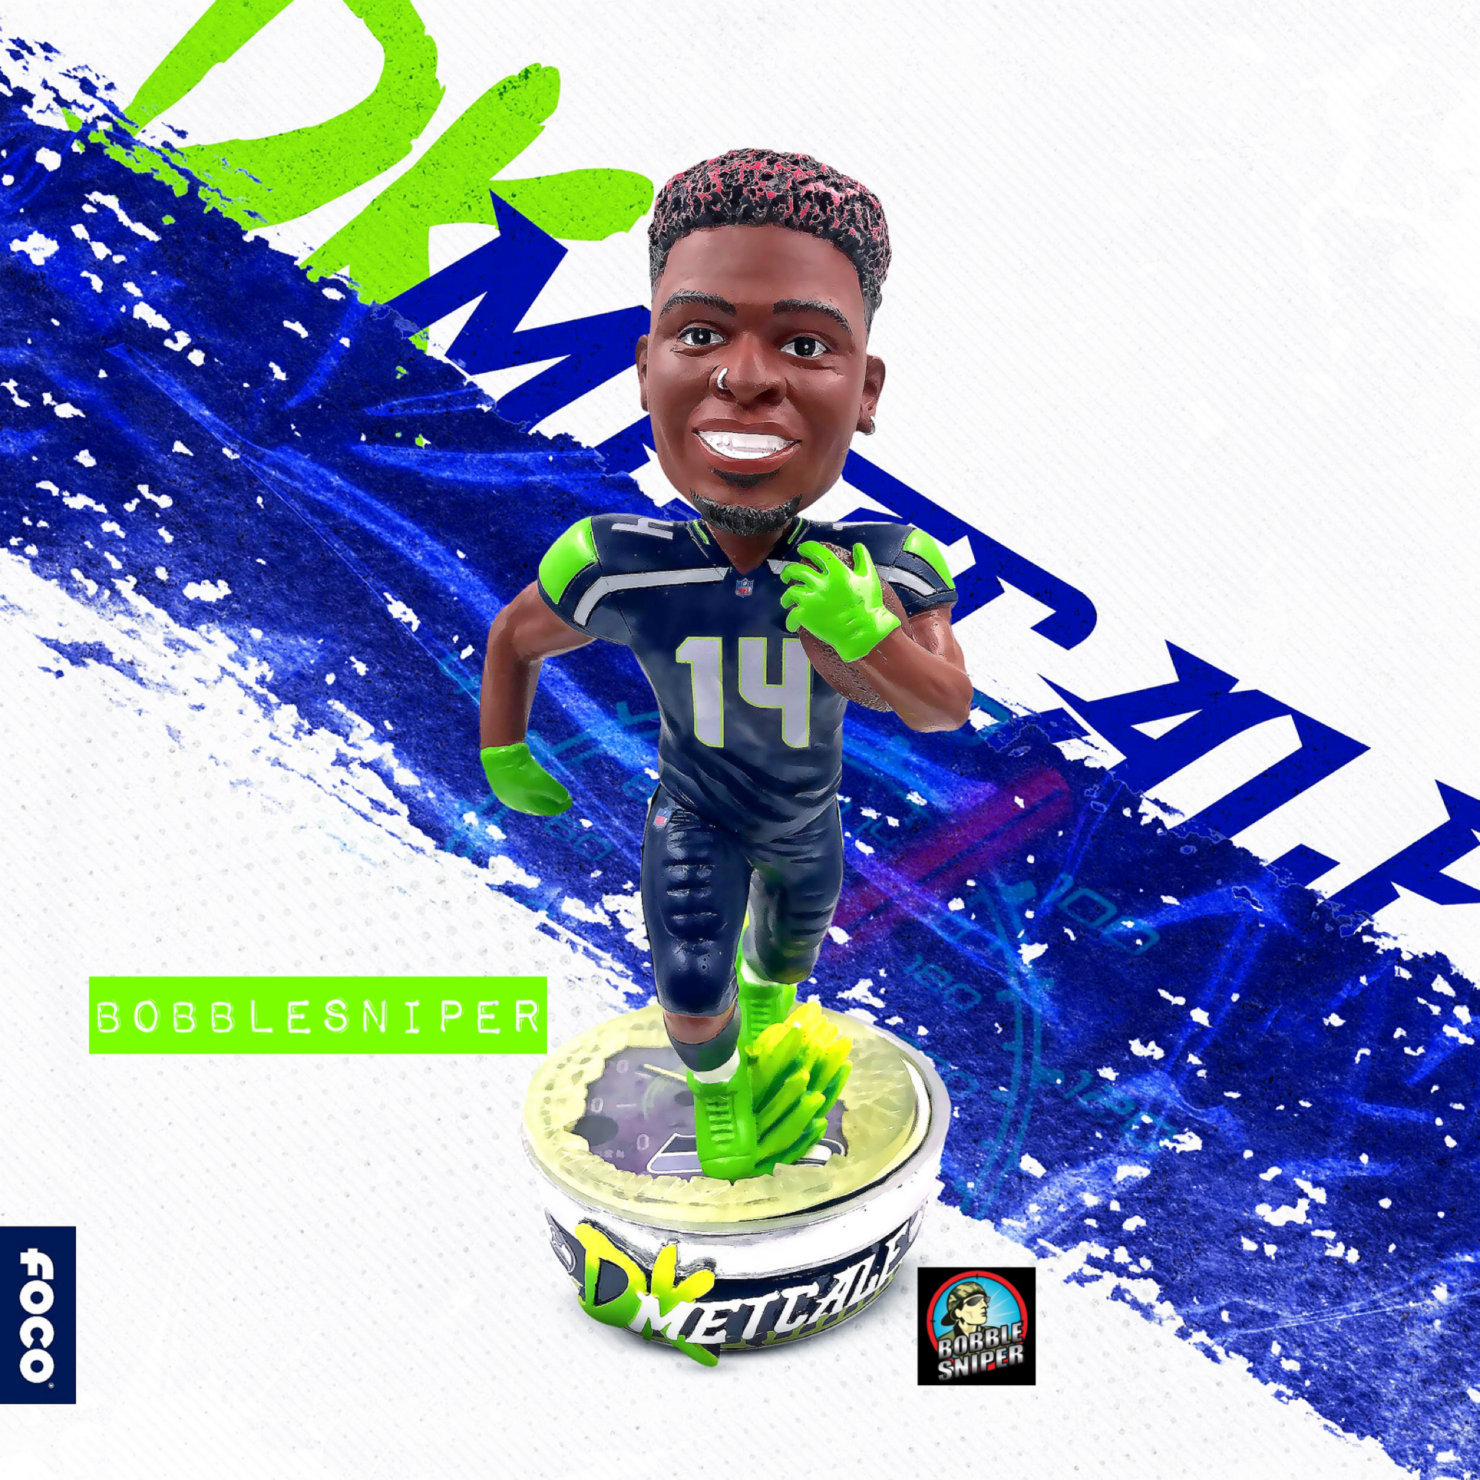 FOCO Kicks It Into High Gear With A DK Metcalf Speedometer Bobblehead